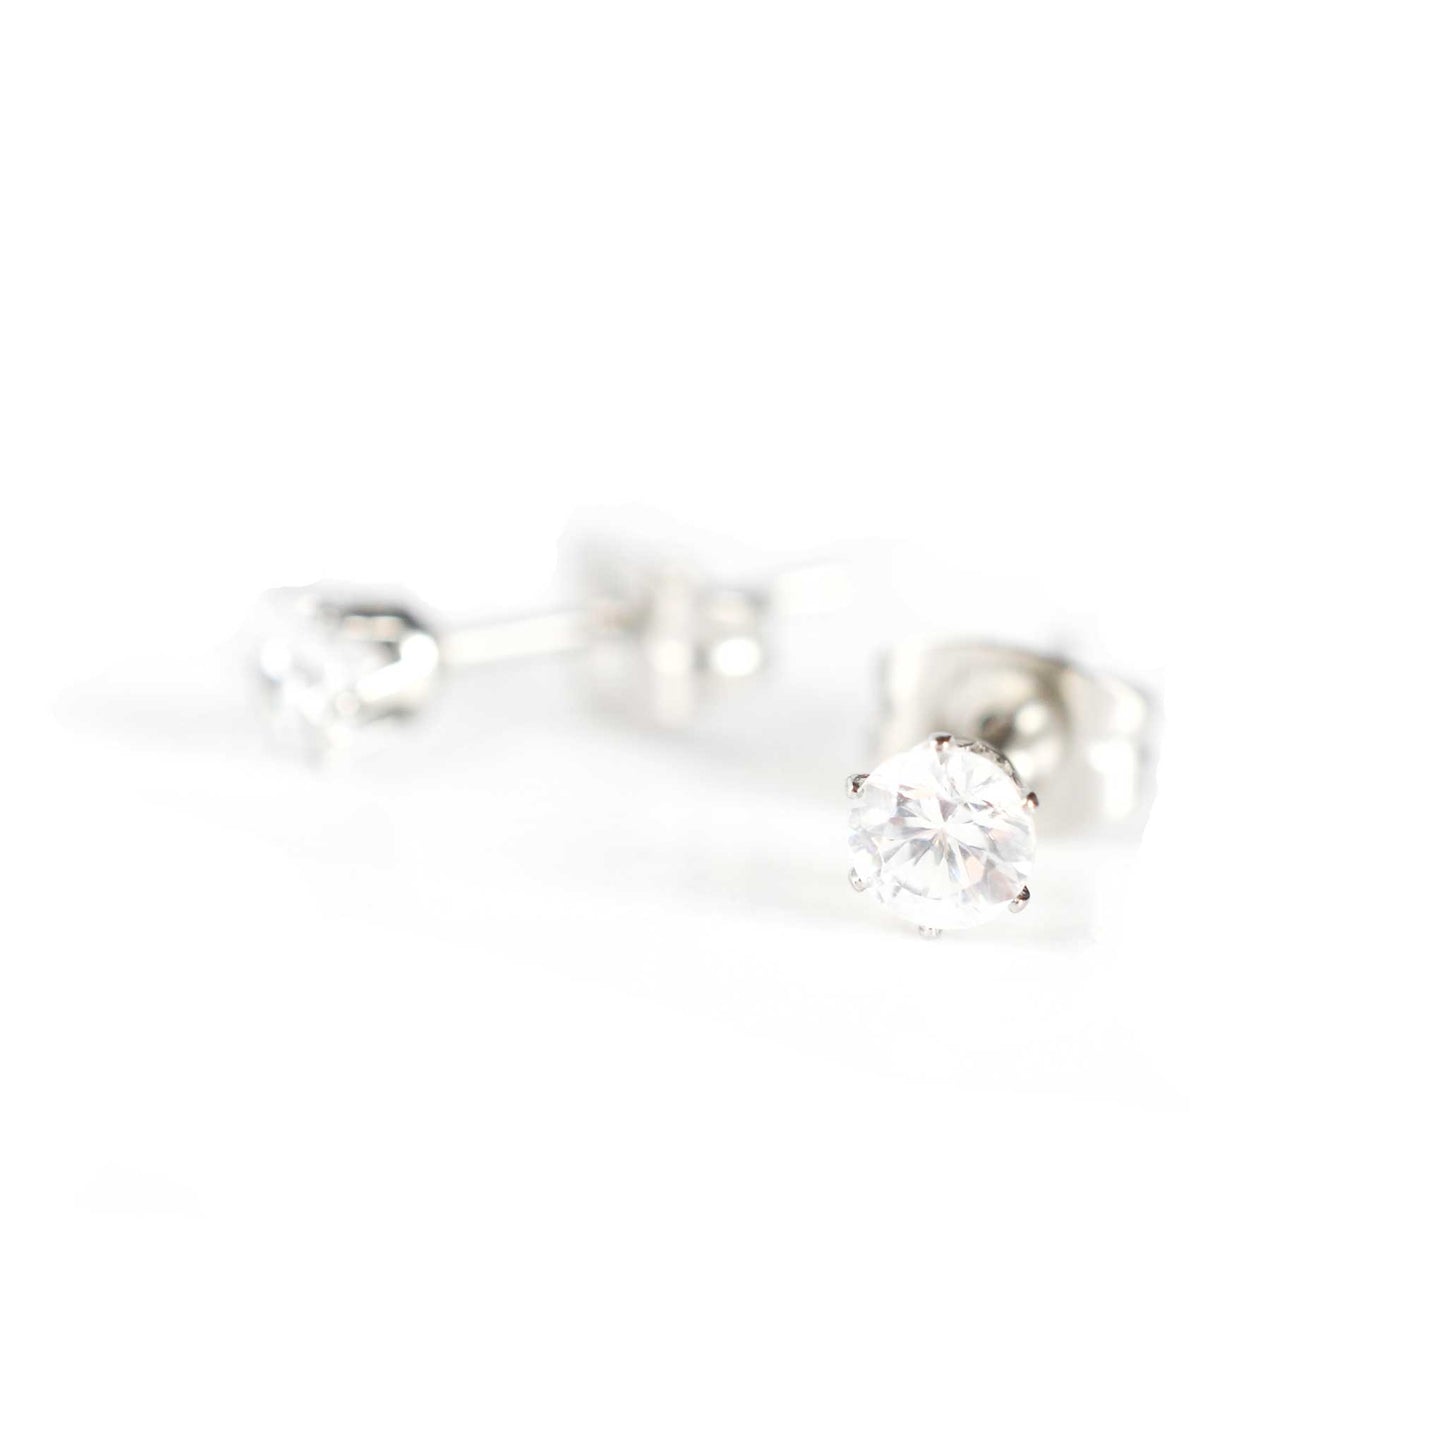 Tiny clear Cubic Zirconia gemstone stud earrings on white background